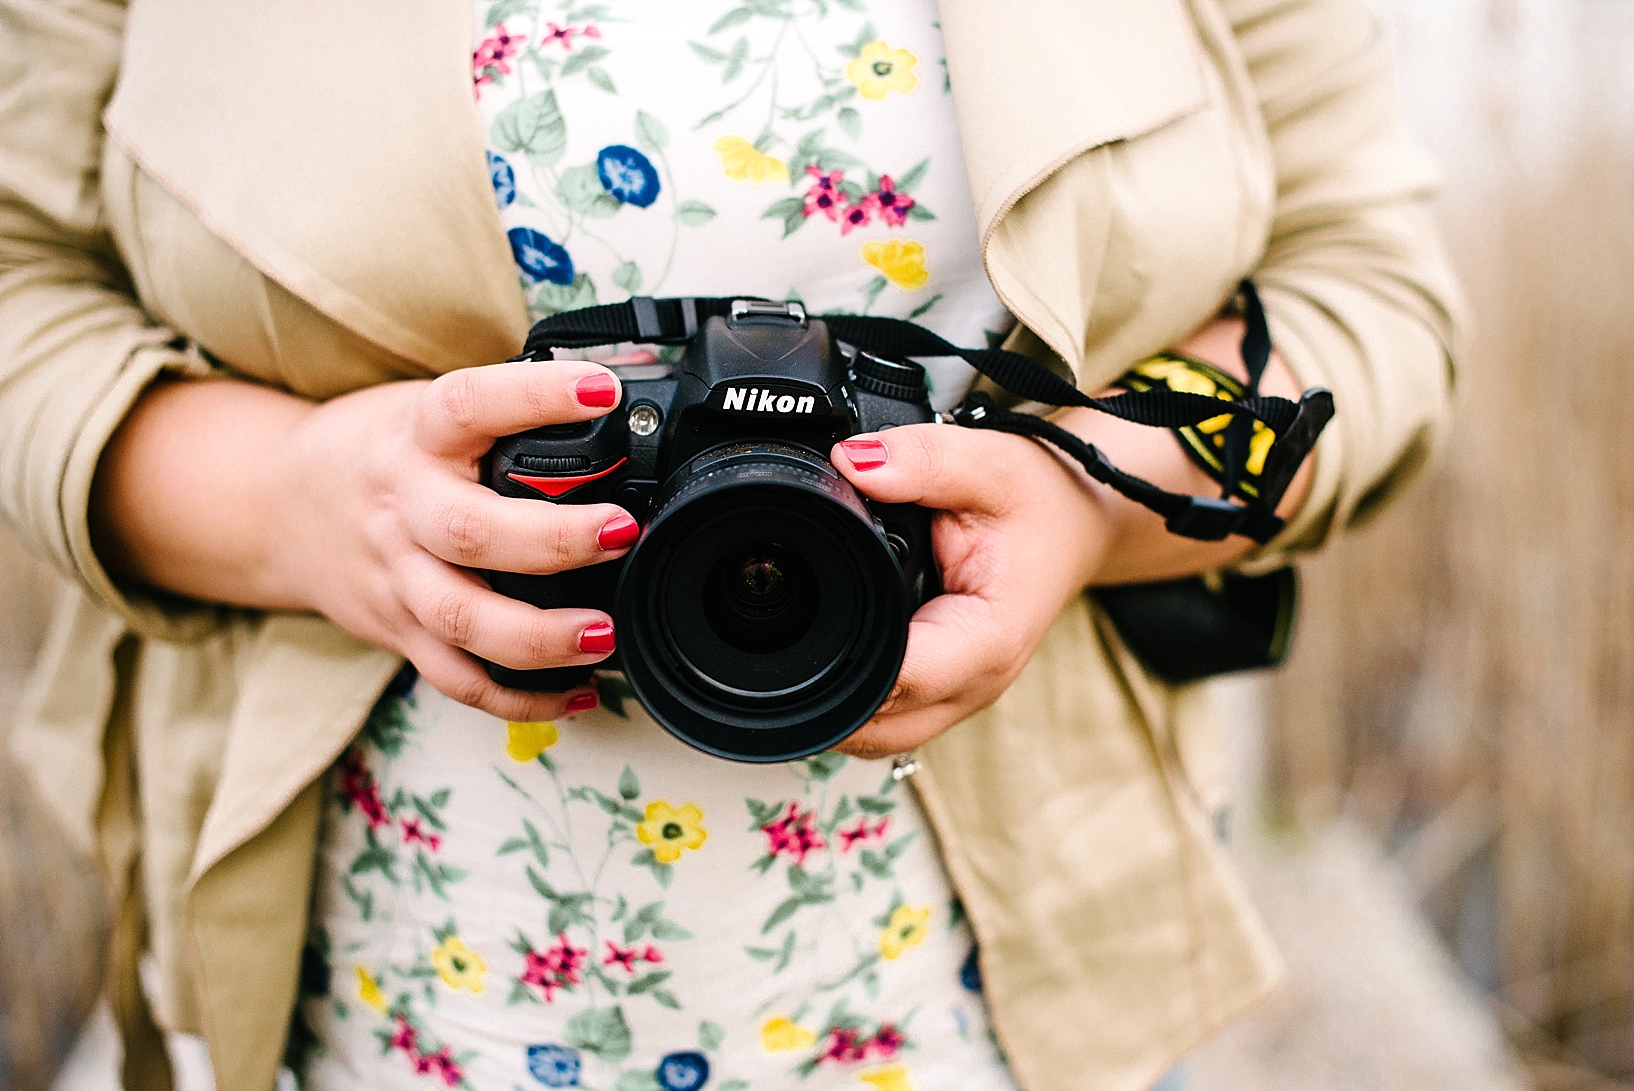 Nikon camera in woman's hands with painted red fingernails wearing floral print shirt and blazer